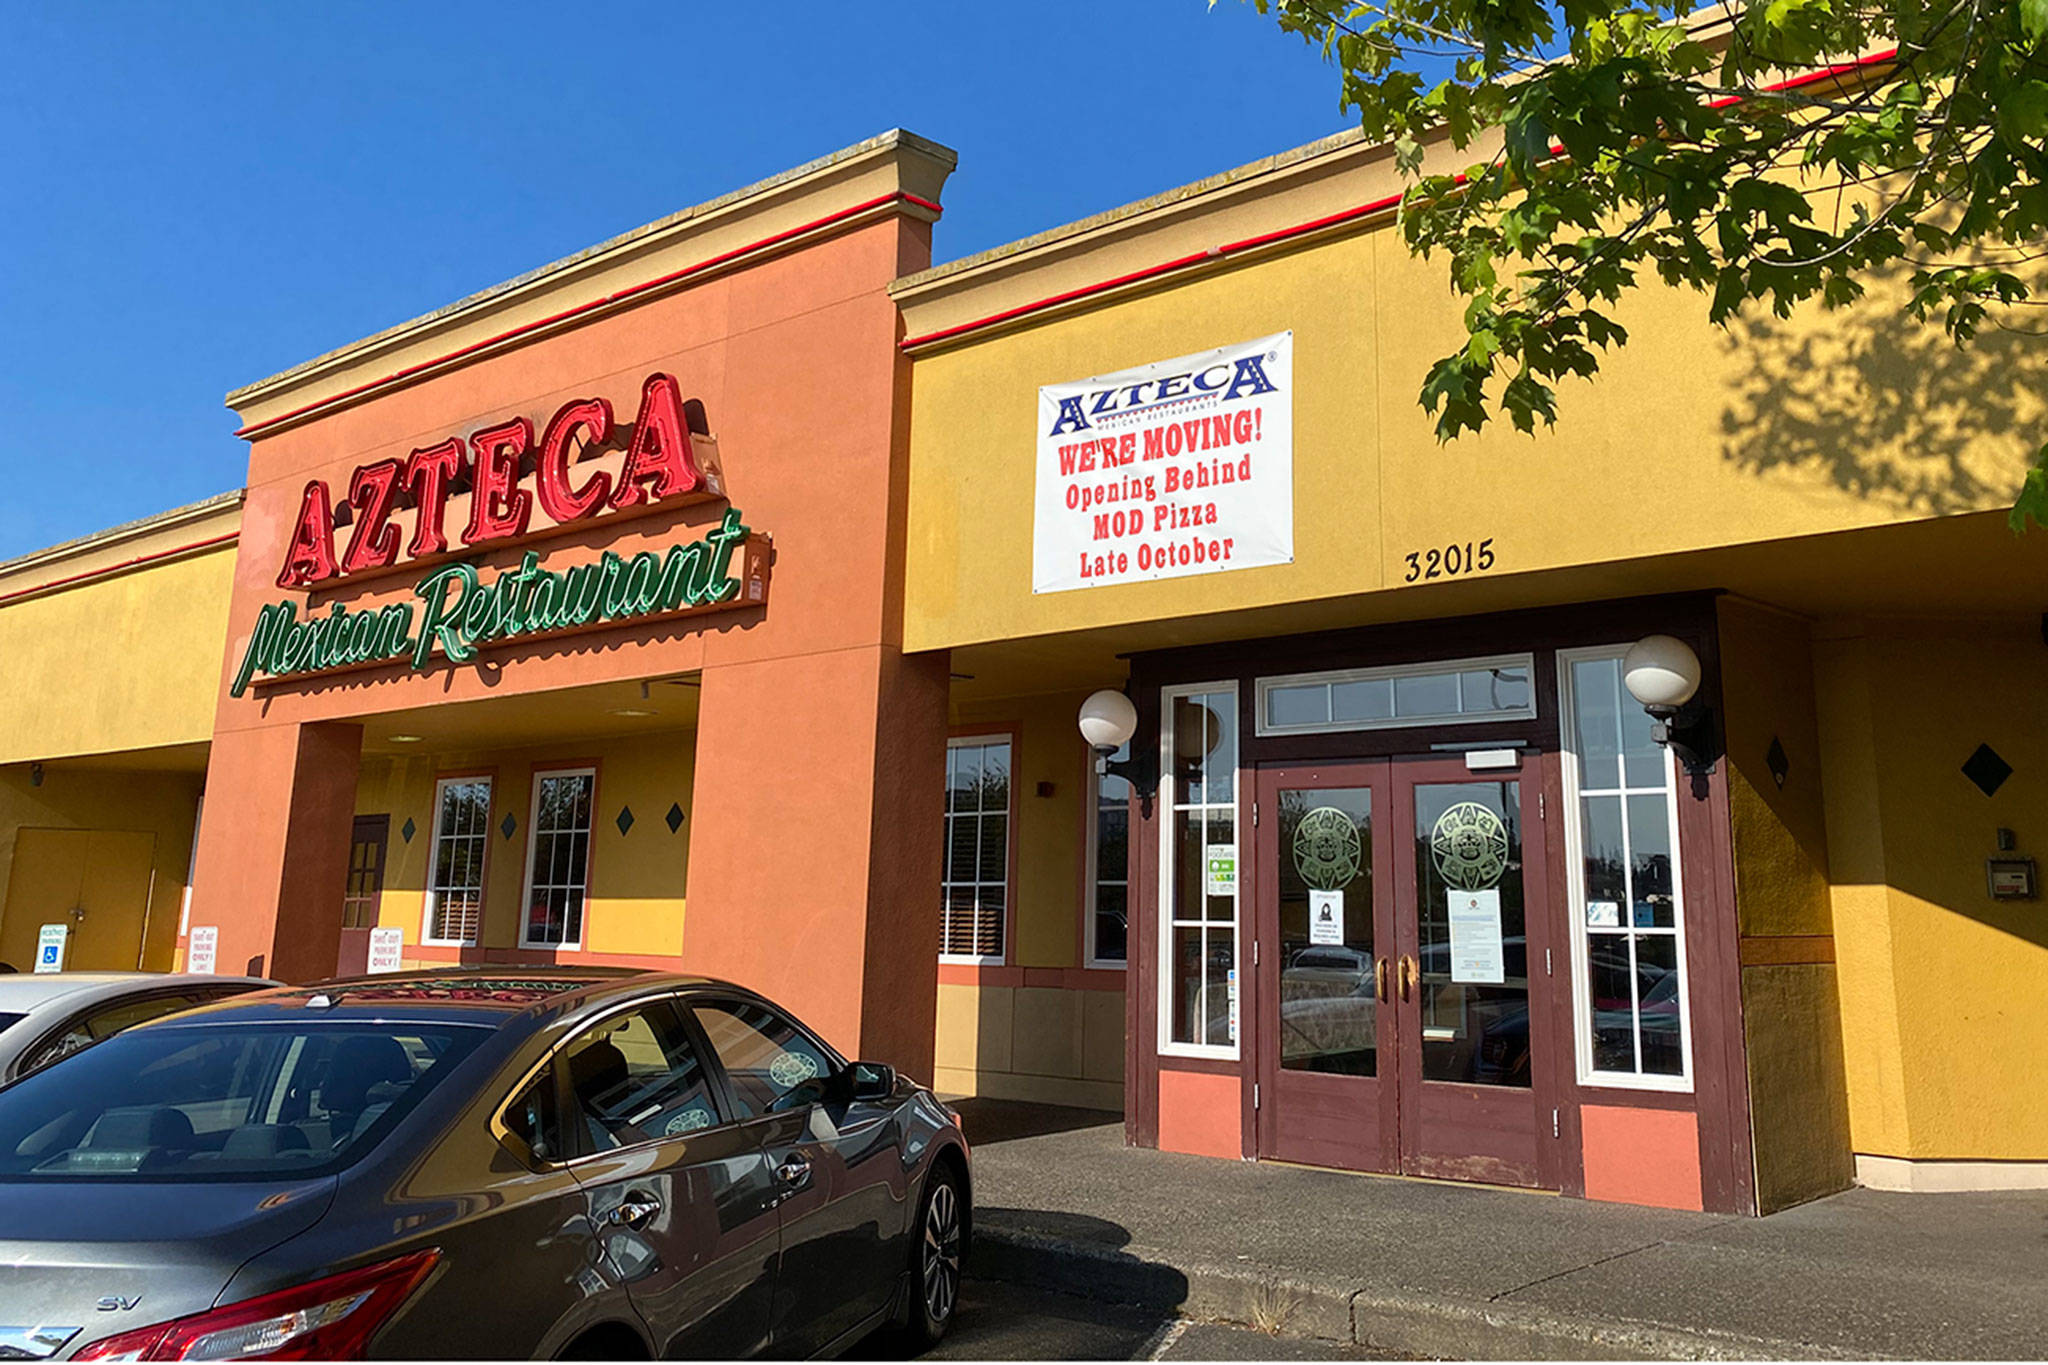 Azteca Mexican Restaurant at 32015 23rd Ave. S. in Federal Way is closing July 26 and will relocate because of the expansion of the Sound Transit light rail. The nearby Red Robin restaurant closed July 12, also because of the upcoming light rail expansion. Olivia Sullivan/Staff photo